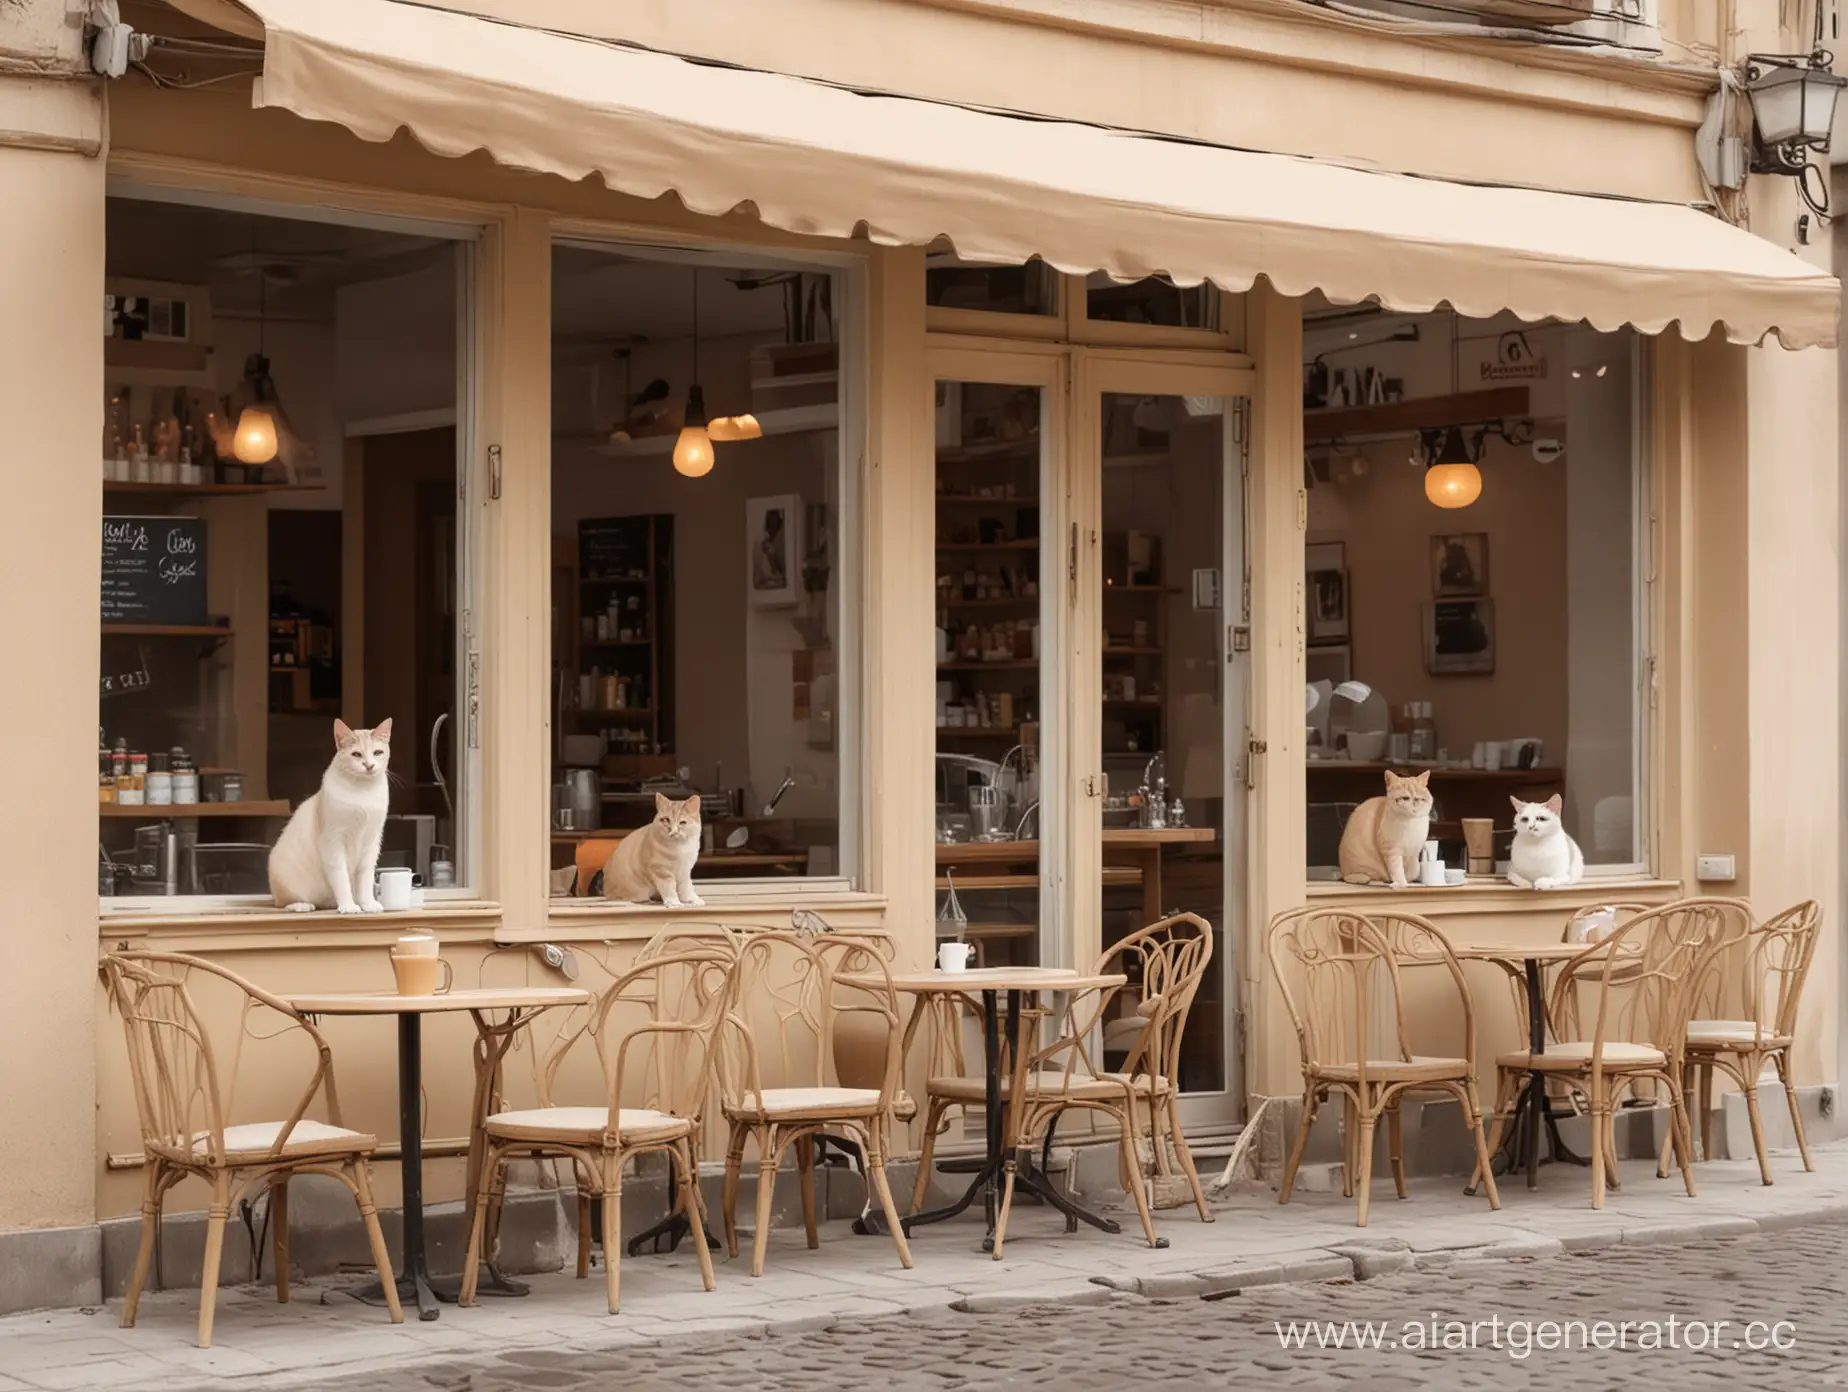 Cozy-Cafe-with-Playful-Cats-Inviting-Atmosphere-in-Beige-Tones